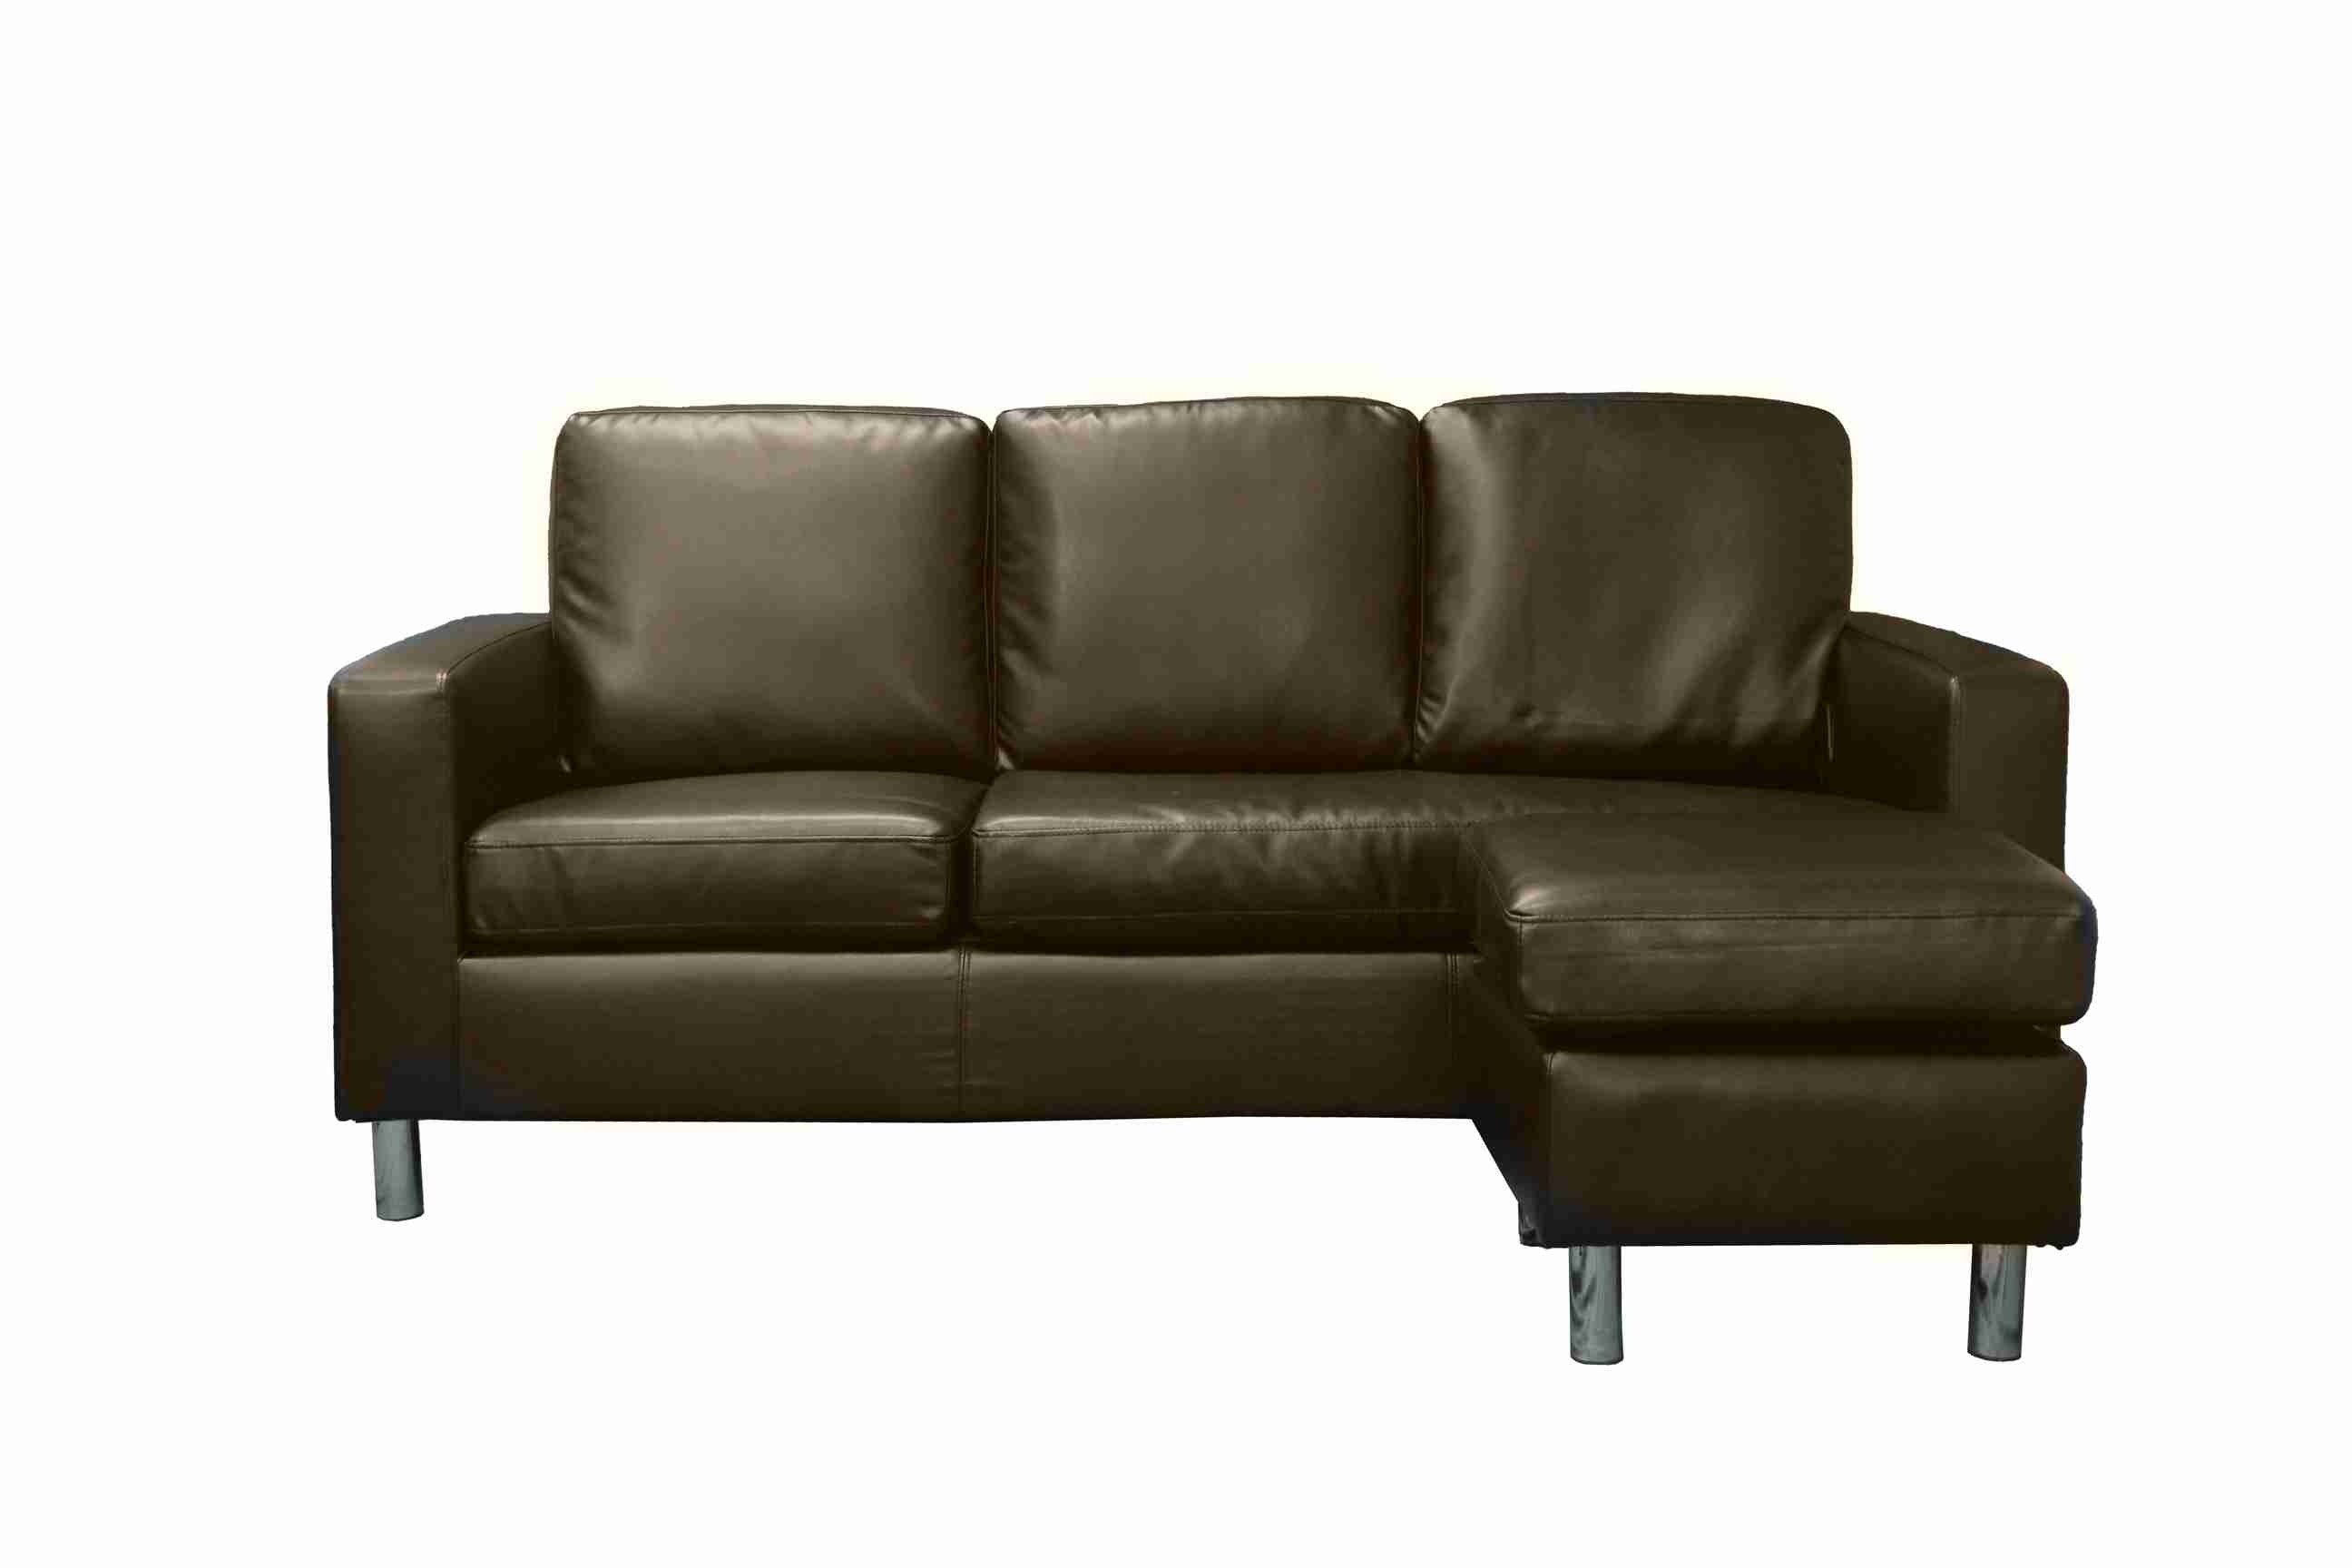 Modern PVC Leather 3 Seater Sectional Sofa Small Space Configurable Sofa-Brown -UH-1008-BR